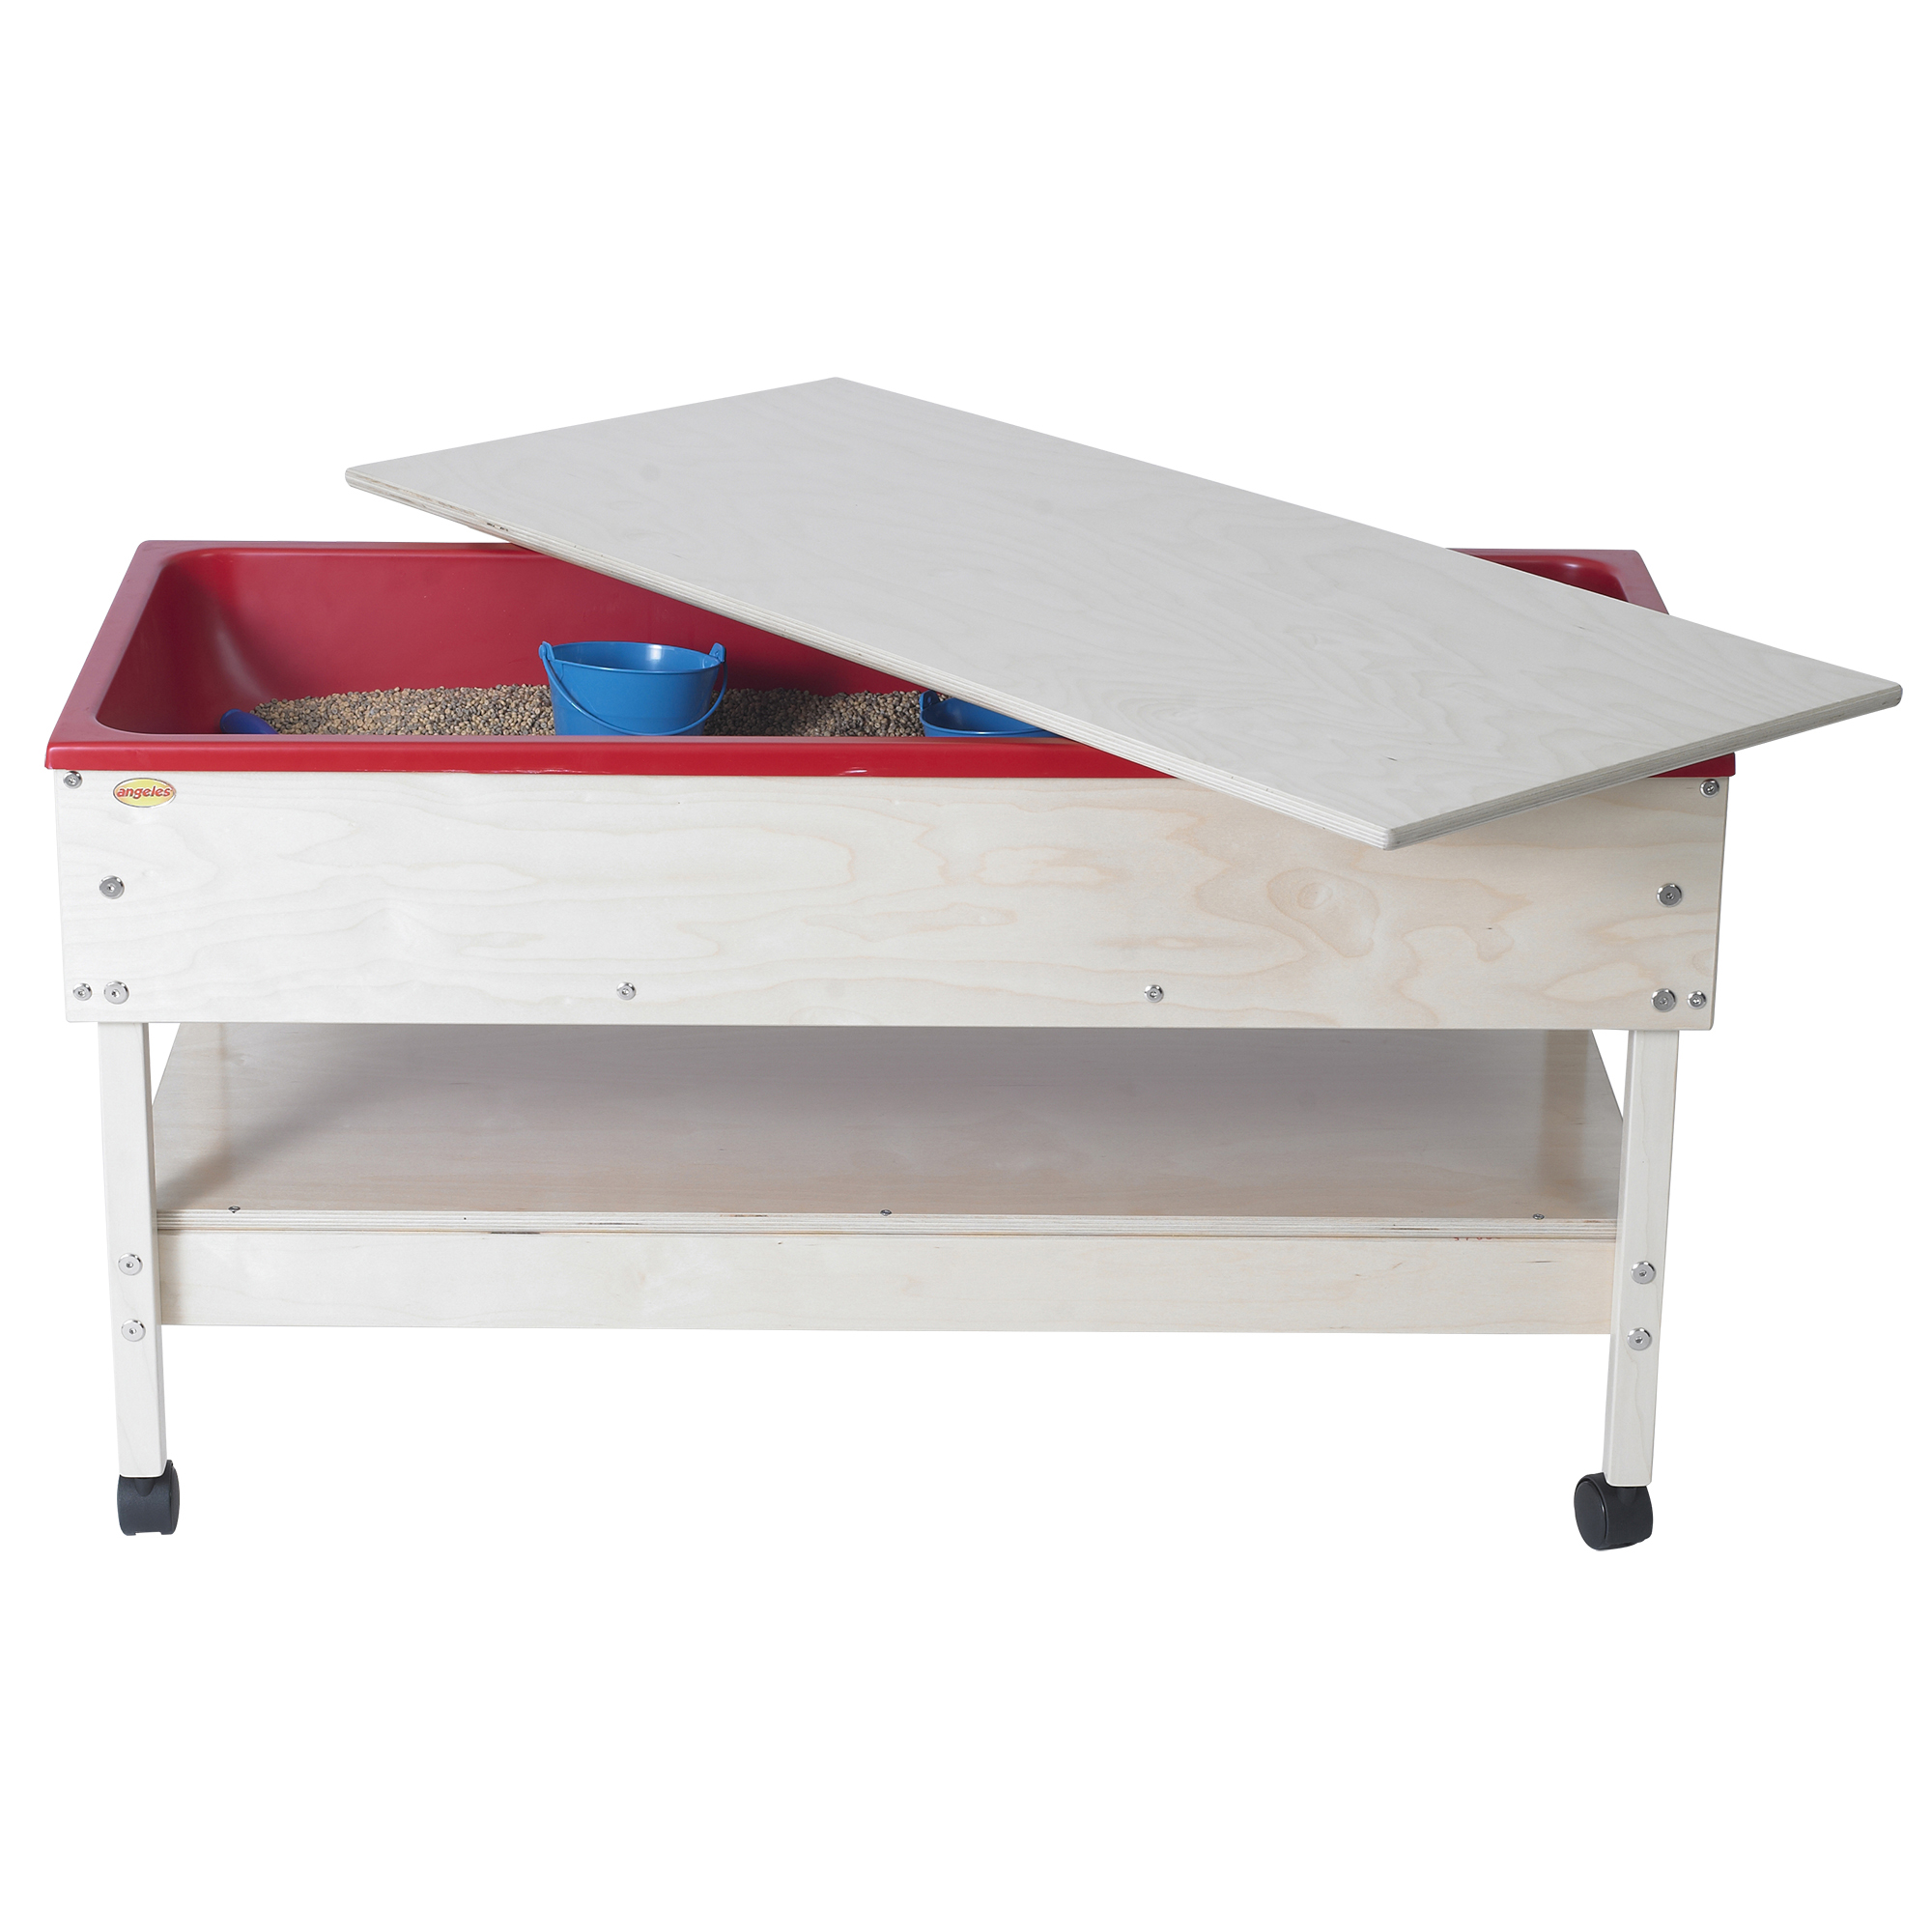 Sand & Water Table with Shelf & Top